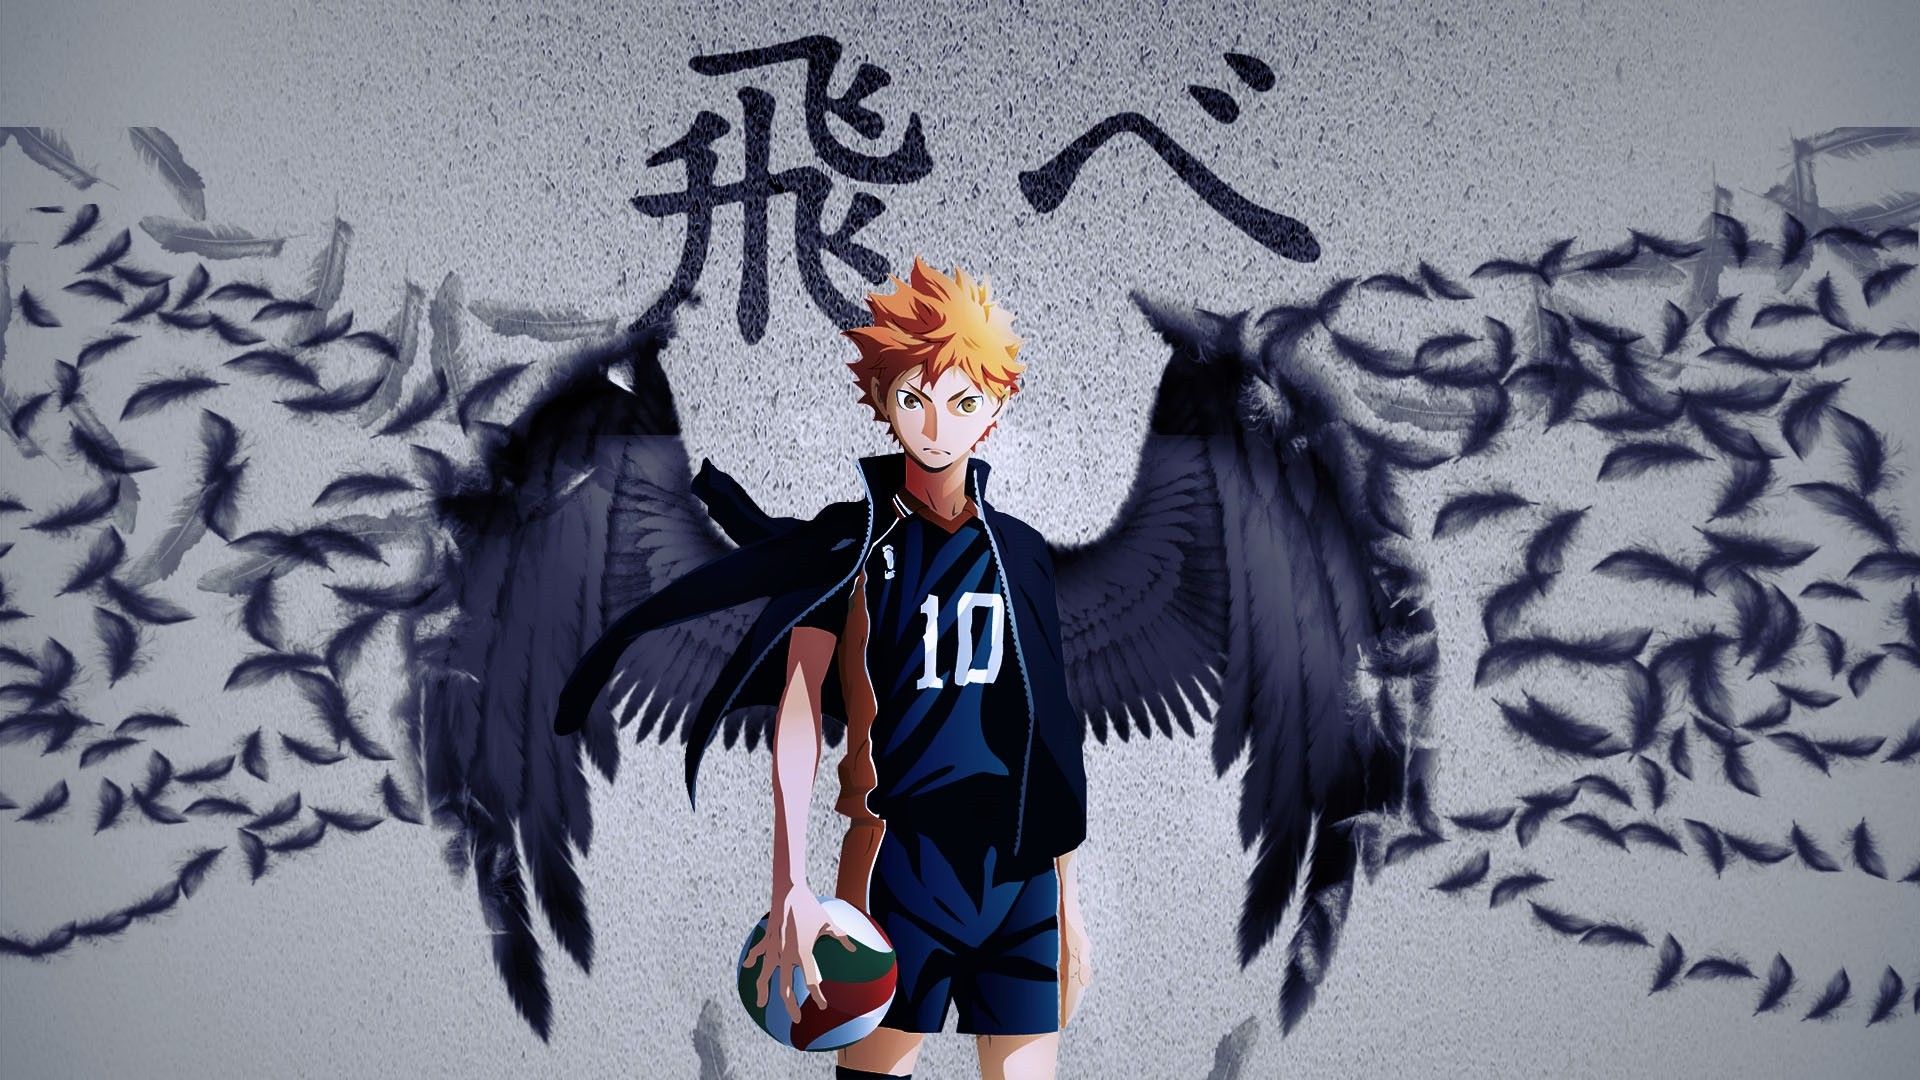 Sims 4 CC's - The Best: Haikyuu Poster - Wallpaper by DominationKid